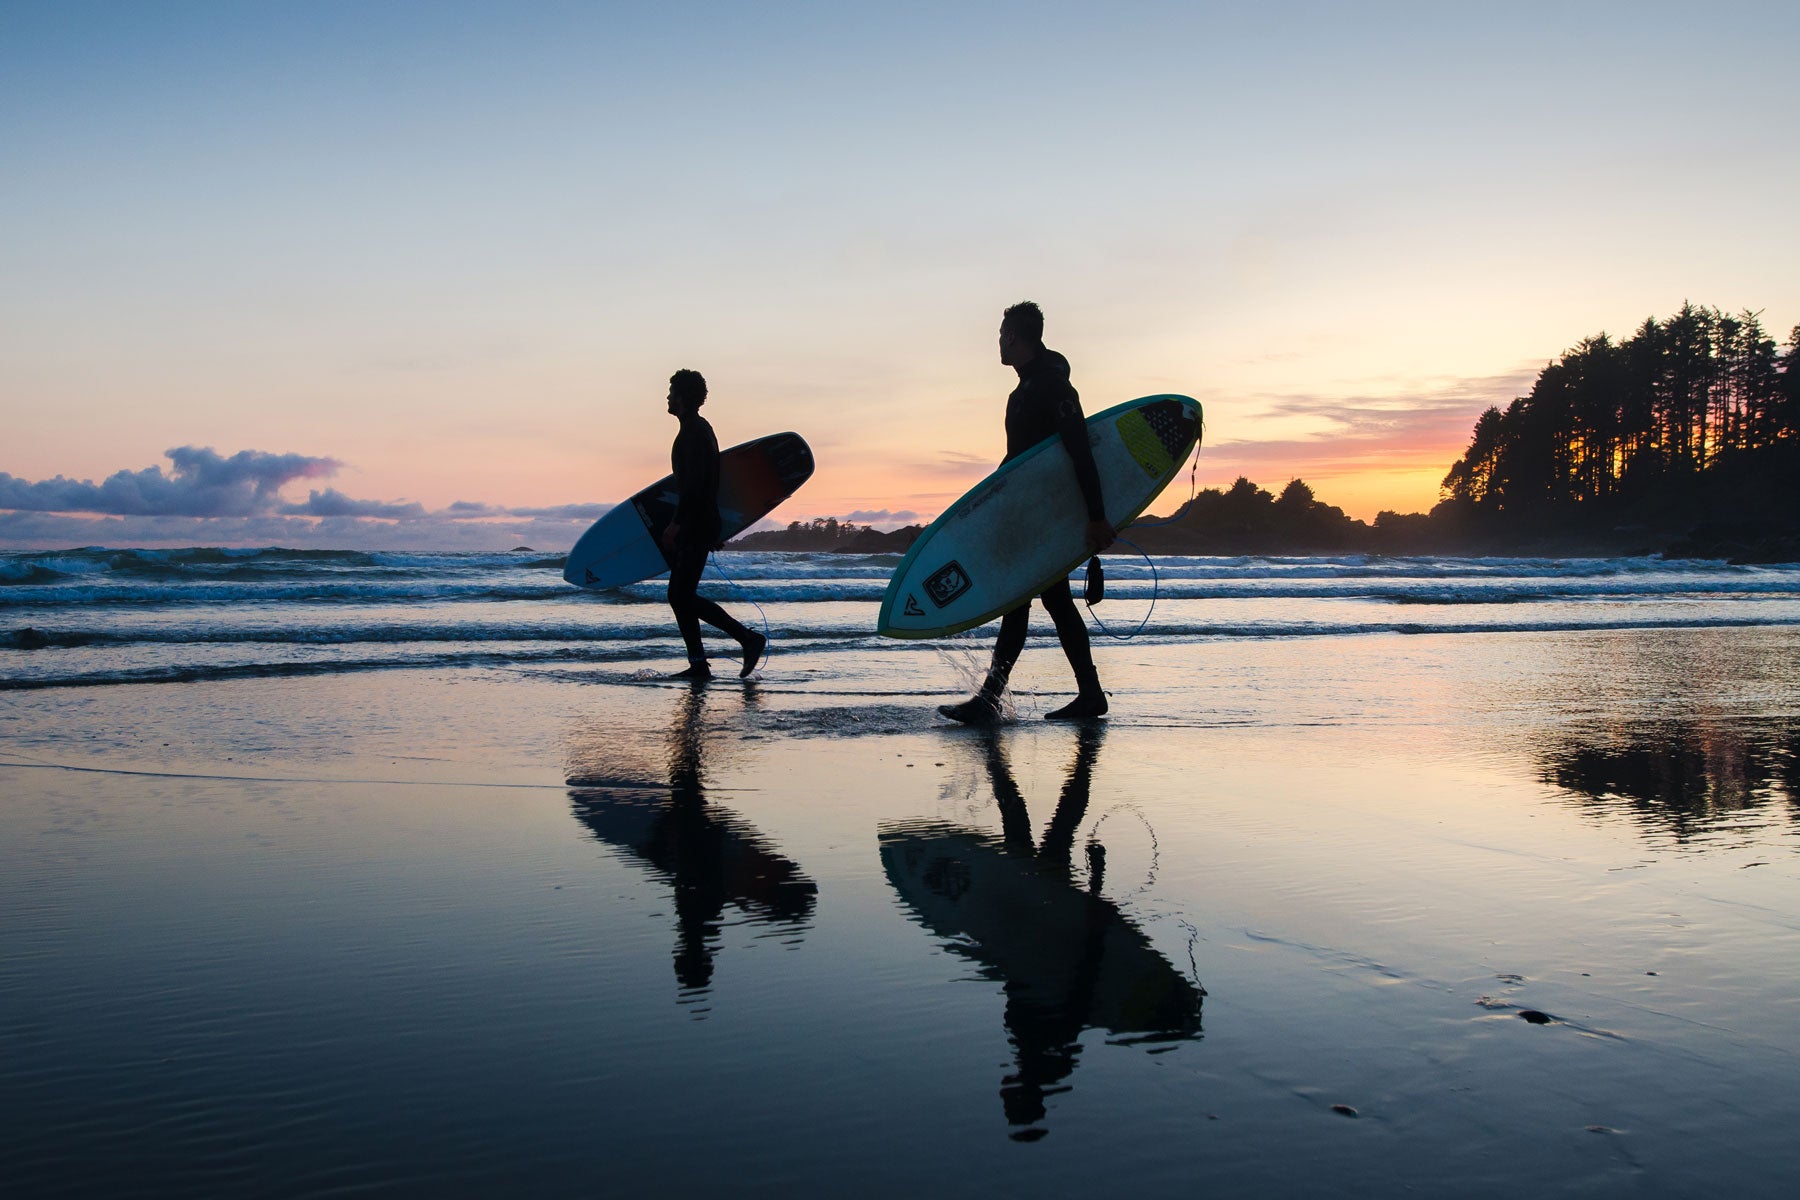 Sunset sessions at Cox Bay, Tofino